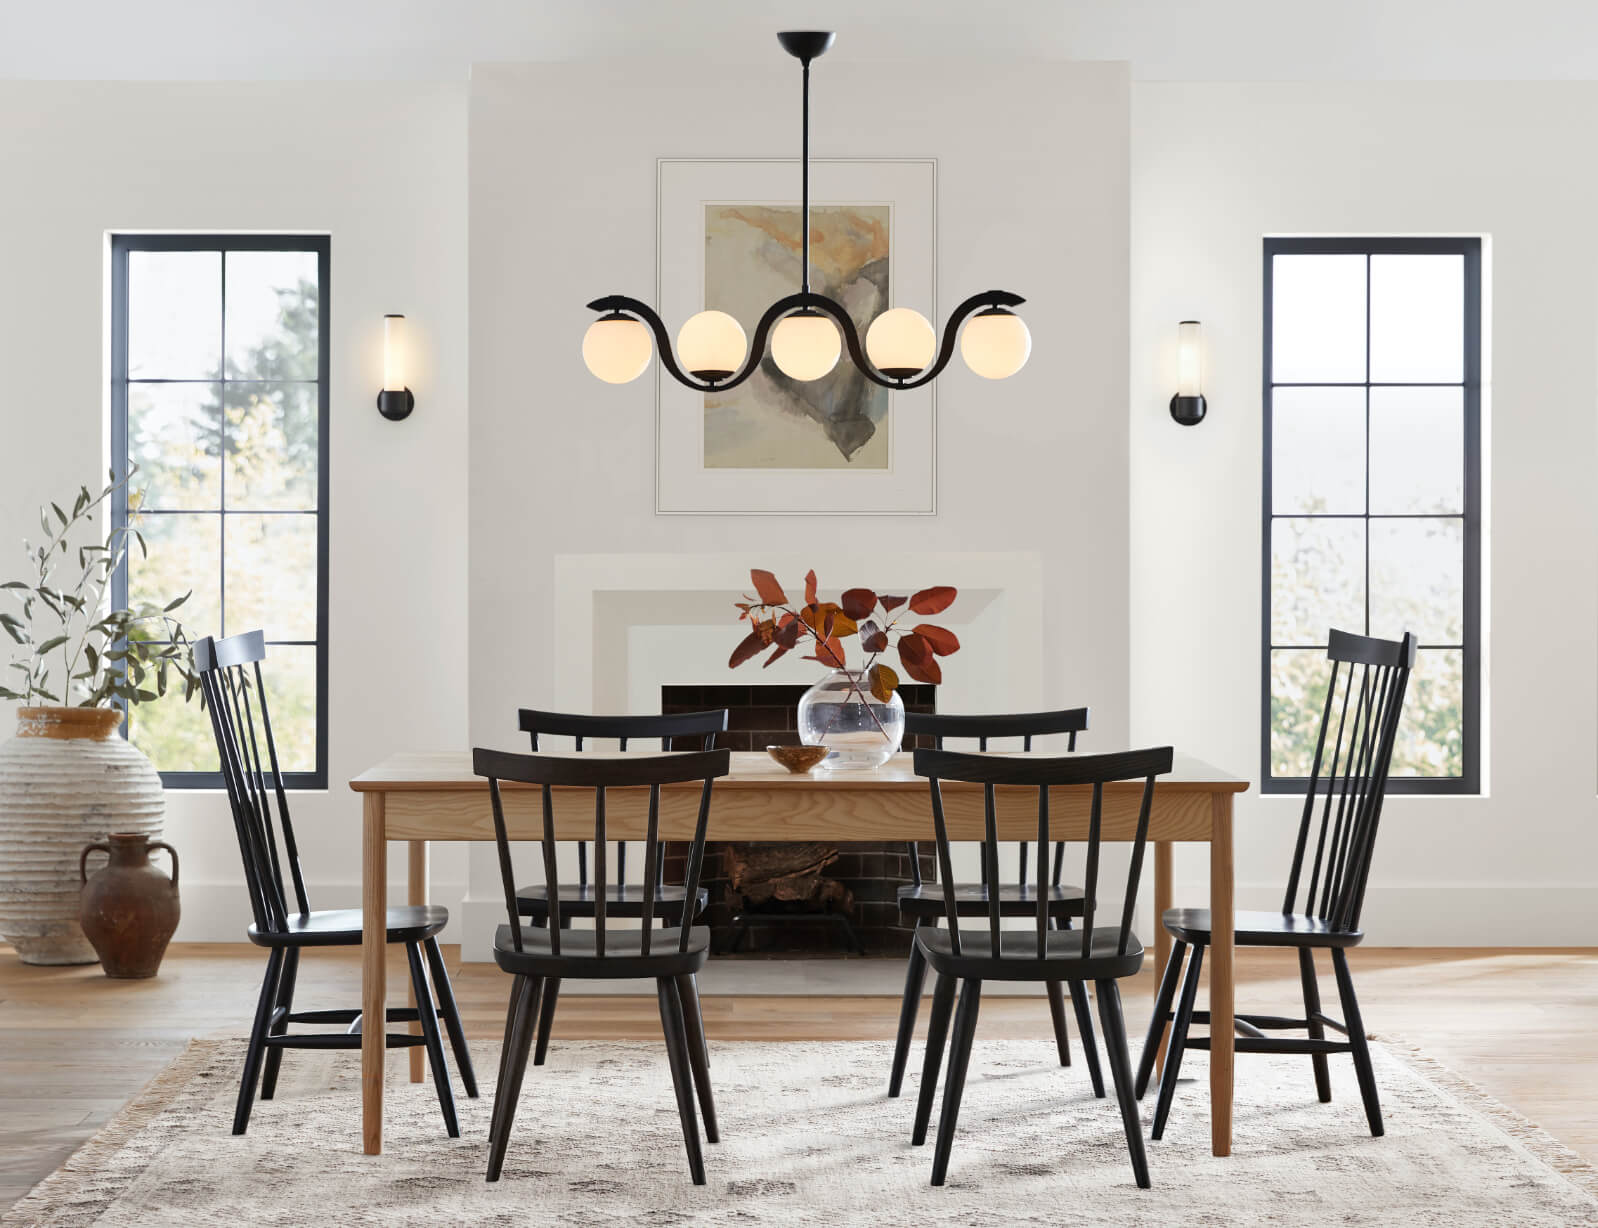 How To Choose Dining Room Lighting, Hanging Lights For Dining Room Table